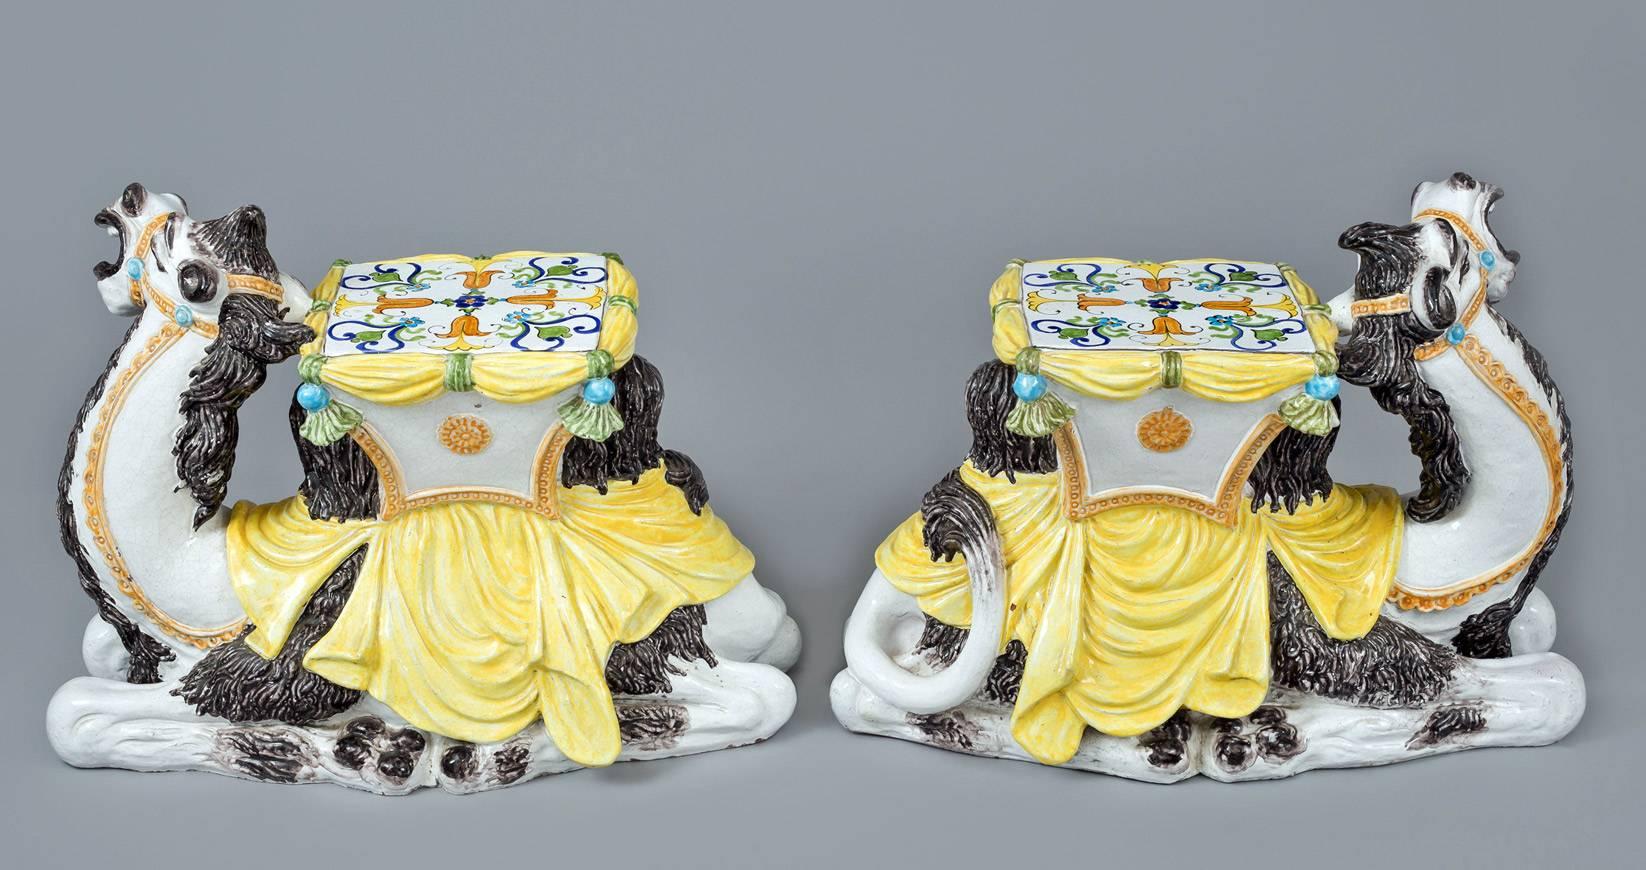 Charming and highly amusing pair of Italian majolica sitting two hump camel side table or garden seat. Between its humps is a saddle decorated with stylized flowers and foliage and draped fabric tied with tassels. Its back is draped with a yellow